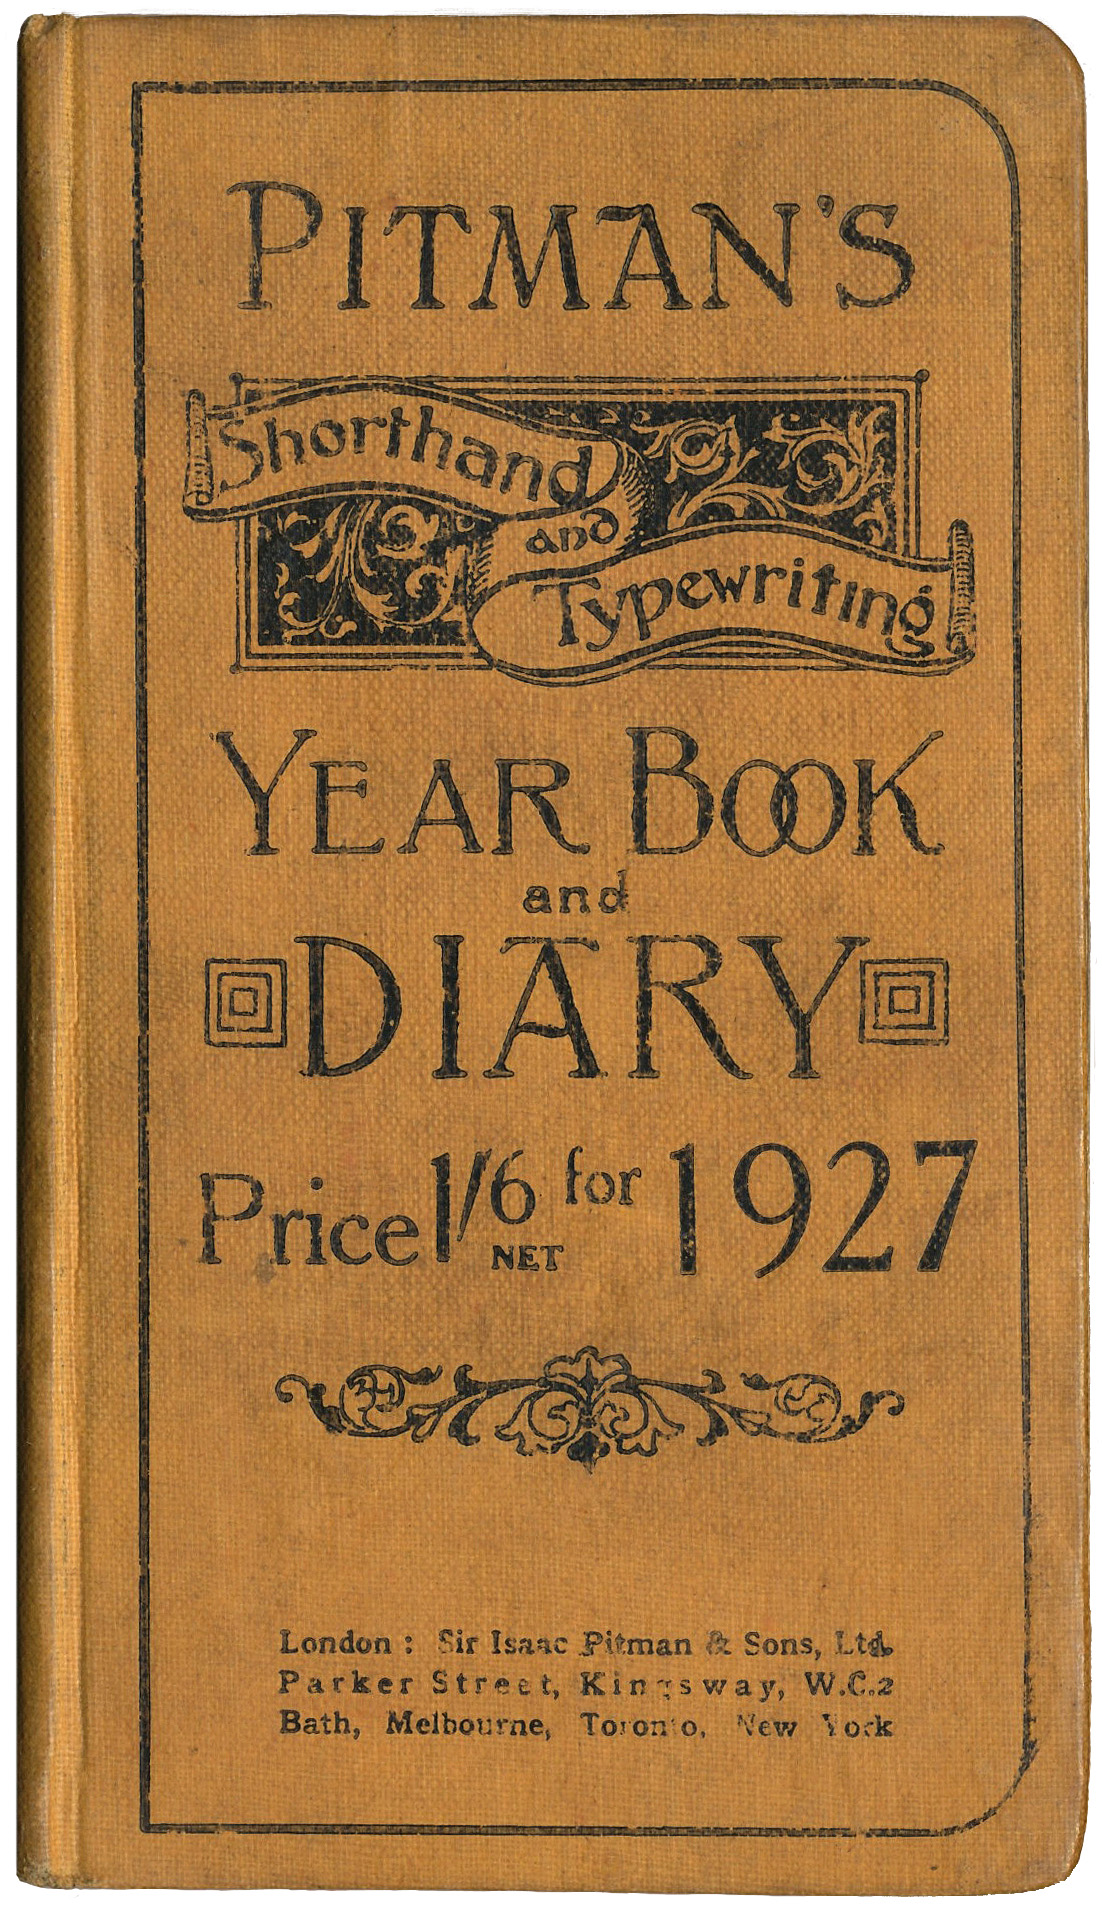 Pitman's Shorthand and Typewriting Year Book and Diary, 1927.